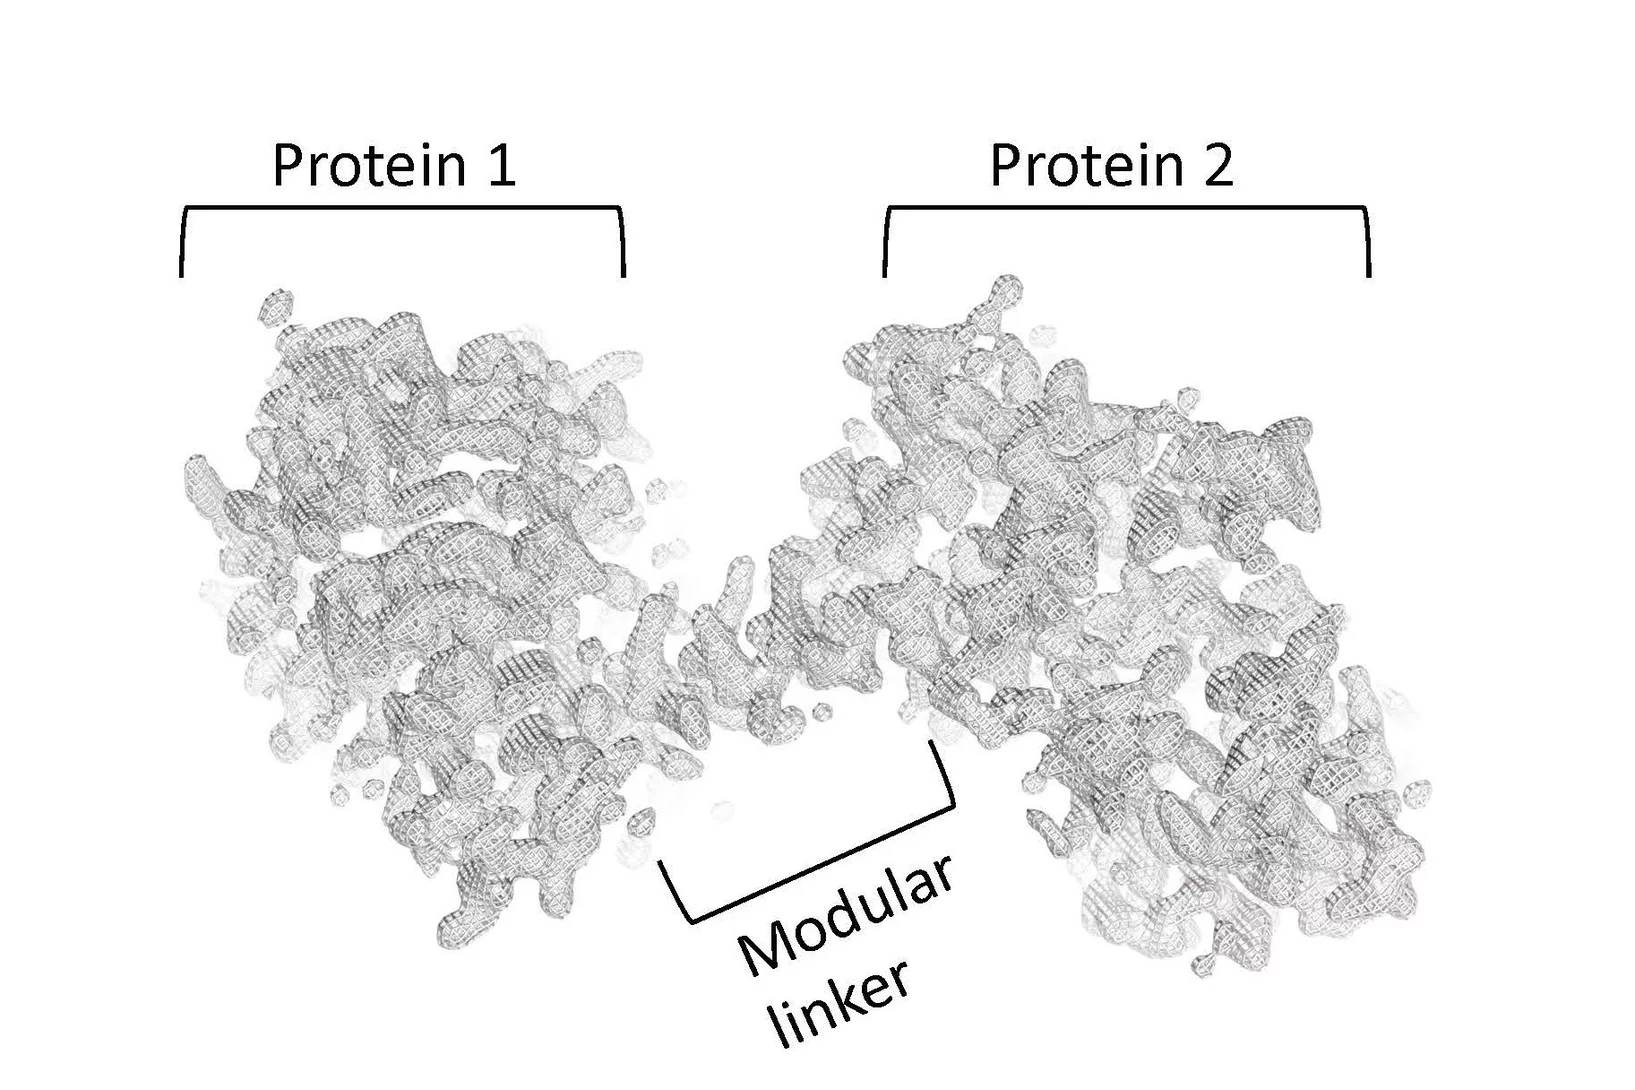 Two proteins are connected to each other at a fixed distance and angle by means of a rigid protein spiral.